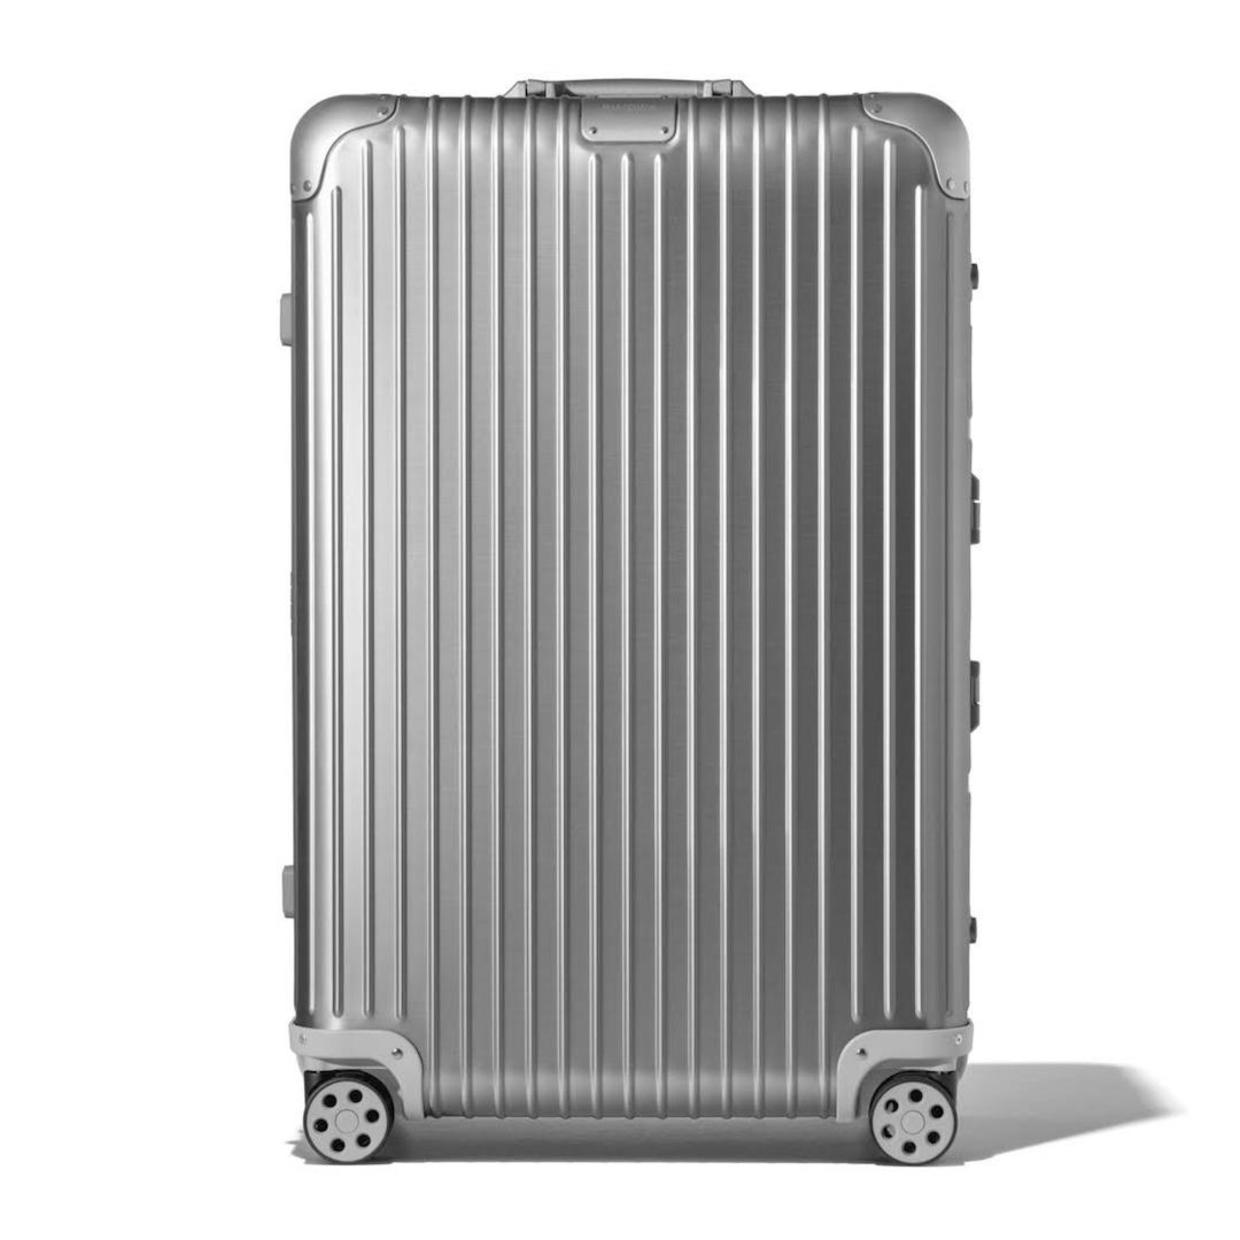 Best aluminum luggage in 2022: Rimowa, Away, Tumi and more - CBS News